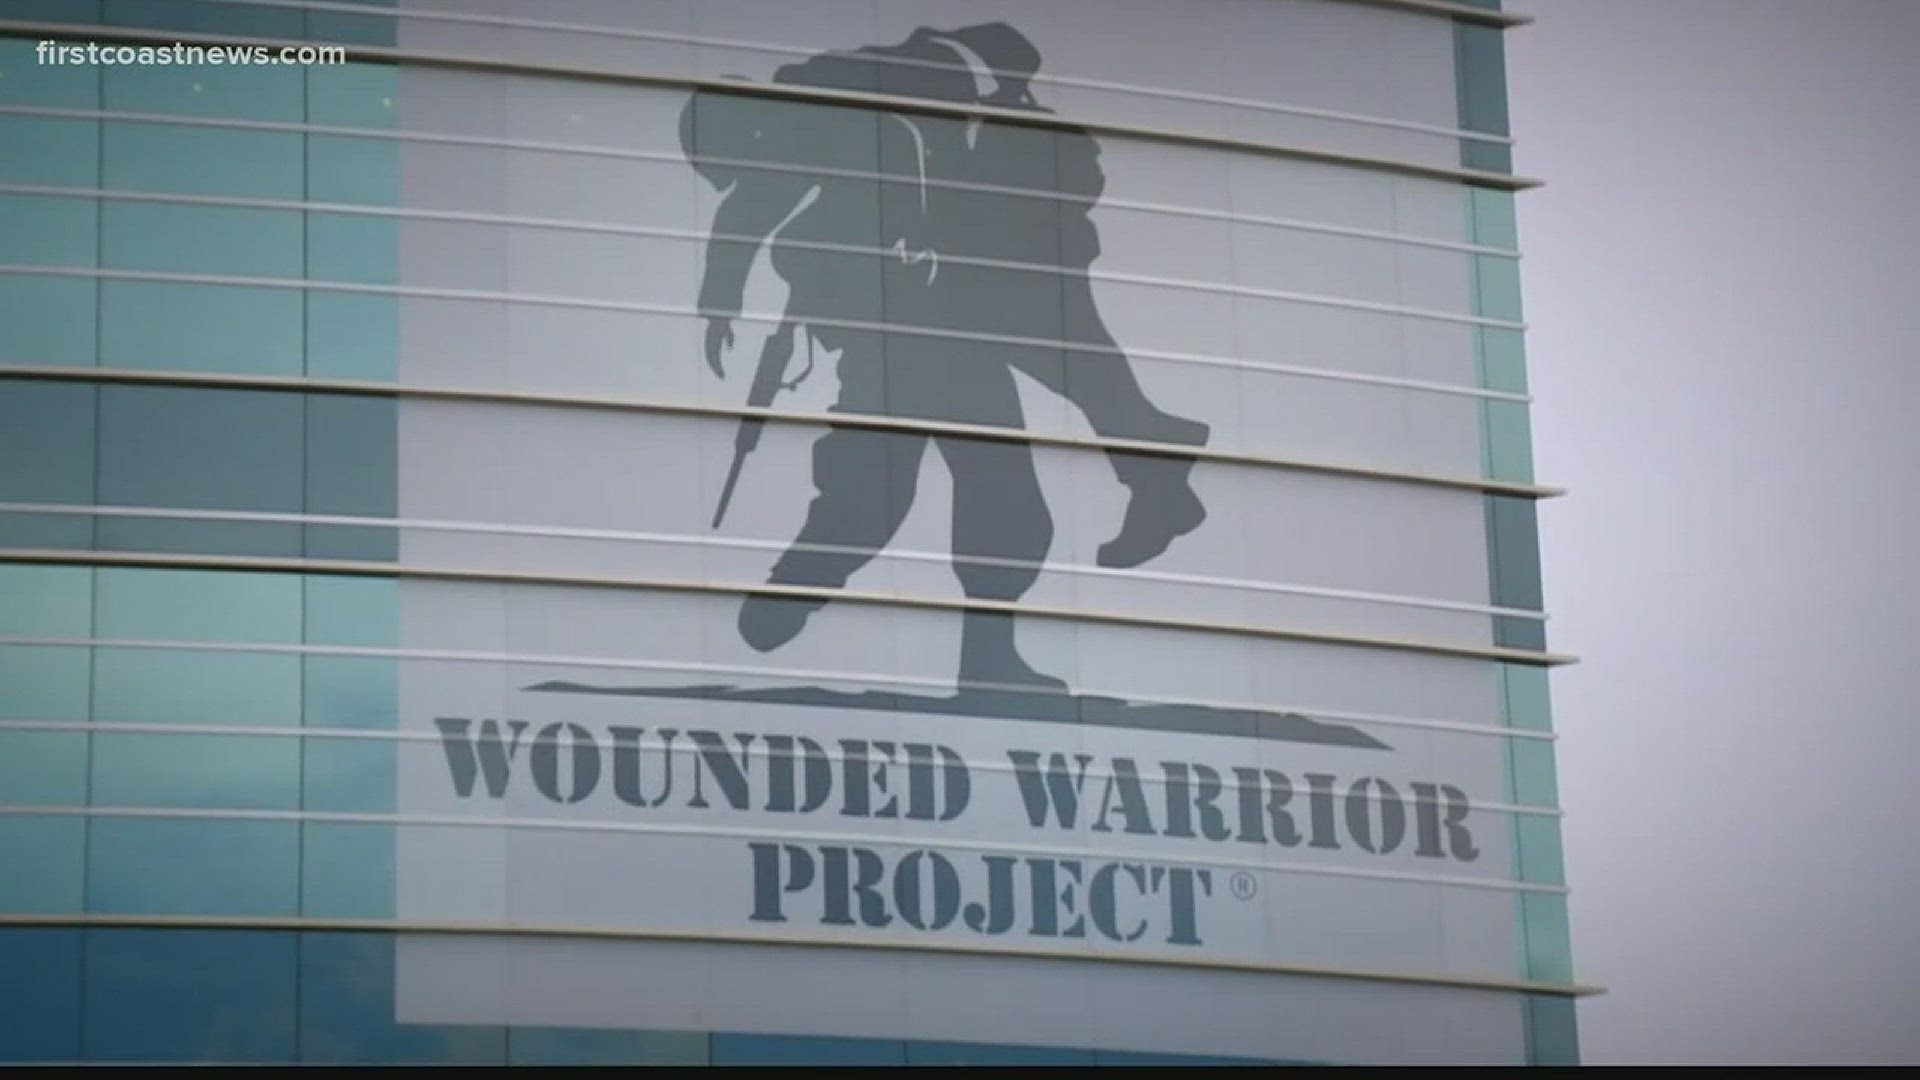 A new initiative will help the Wounded Warrior Project take care of veterans and others dealing with PTSD.